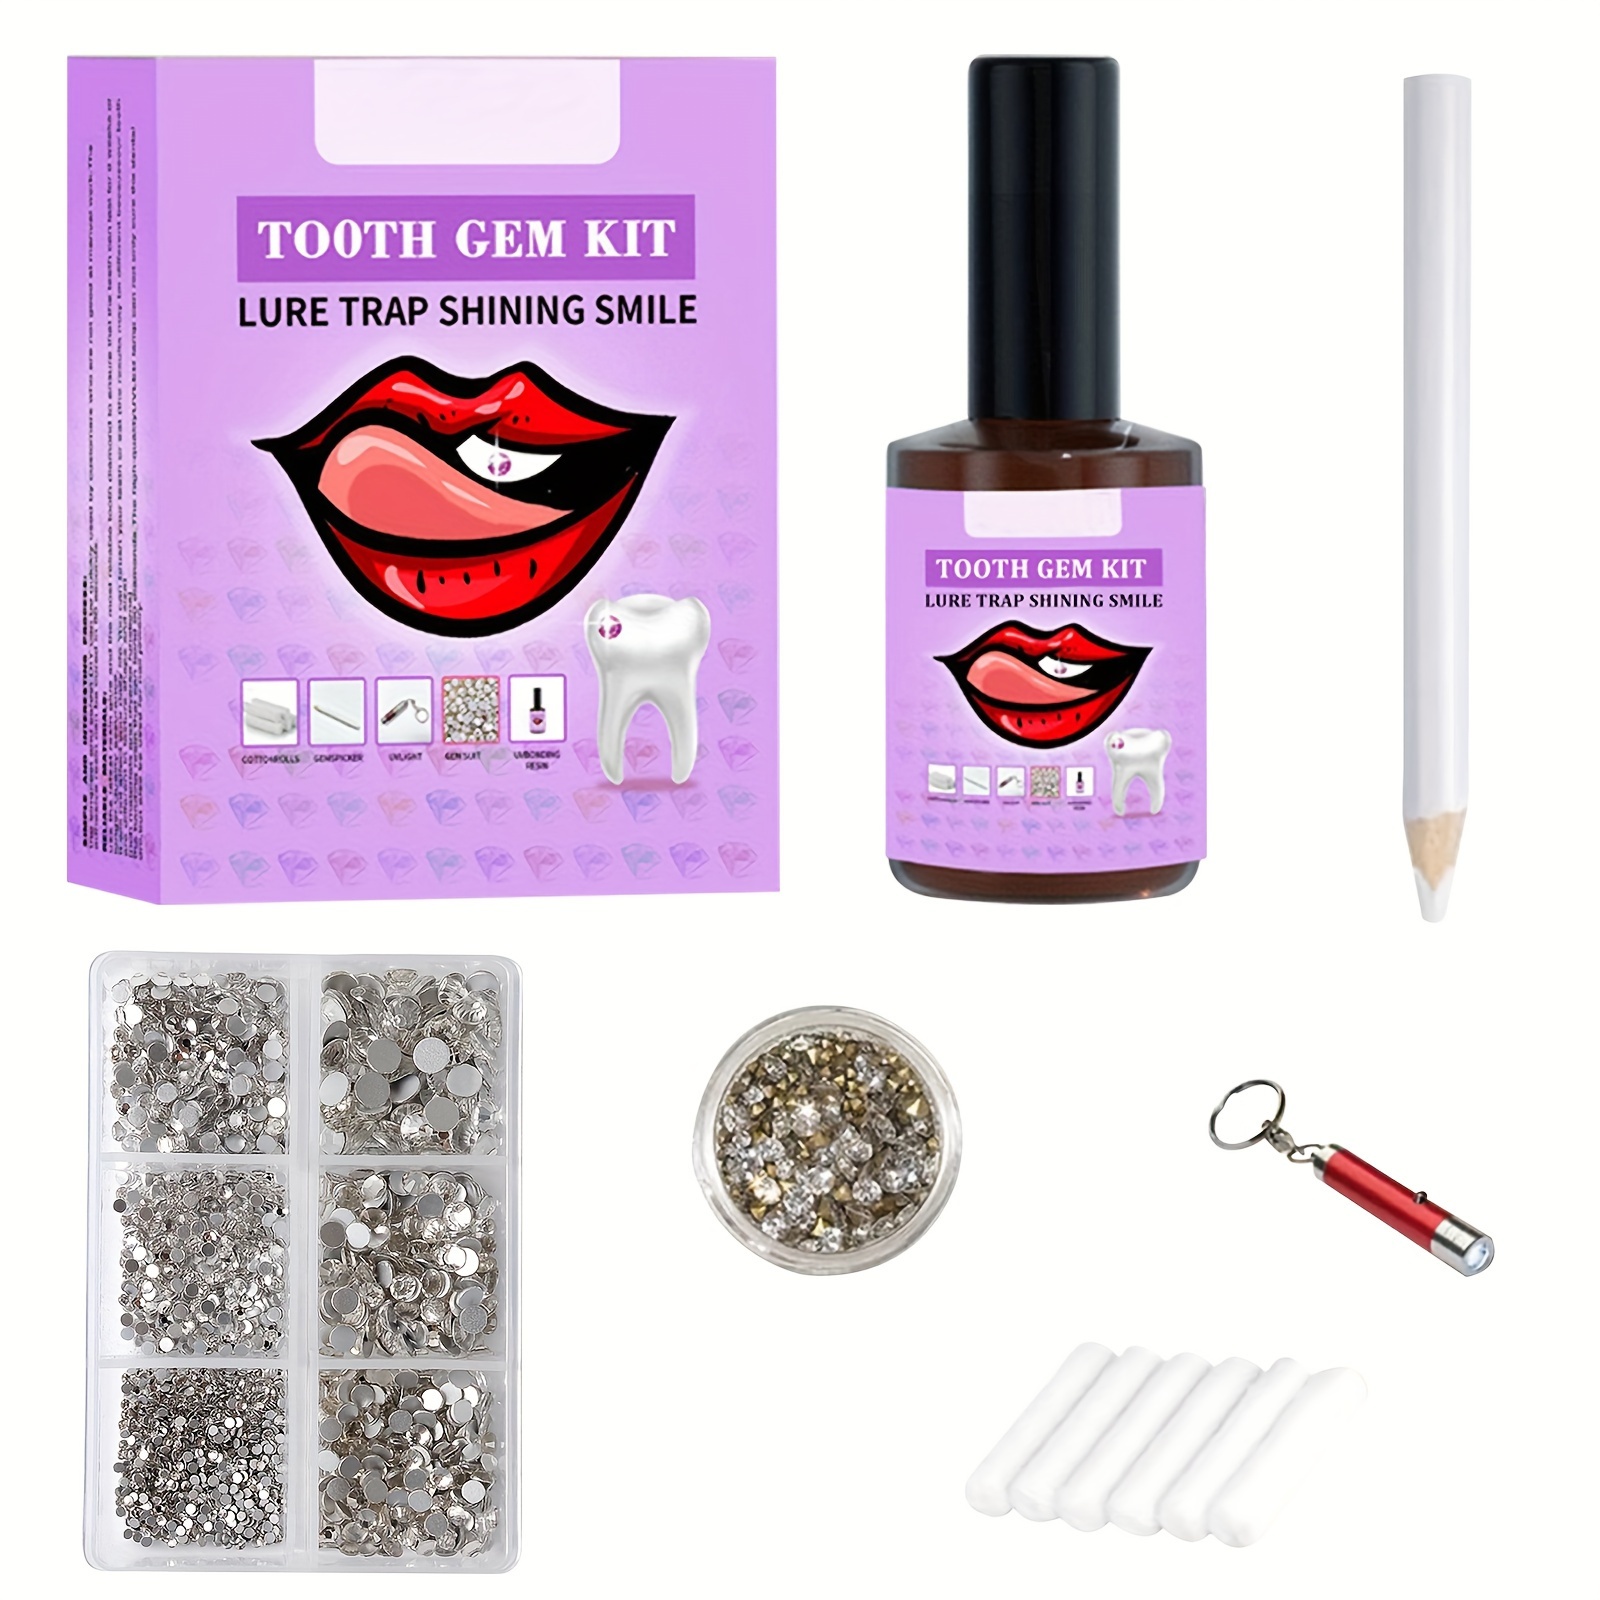 tooth faux gemstone kit with tooth faux gemstone and tooth faux gemstone glue tooth curing lamp essential tooth jewelry kit